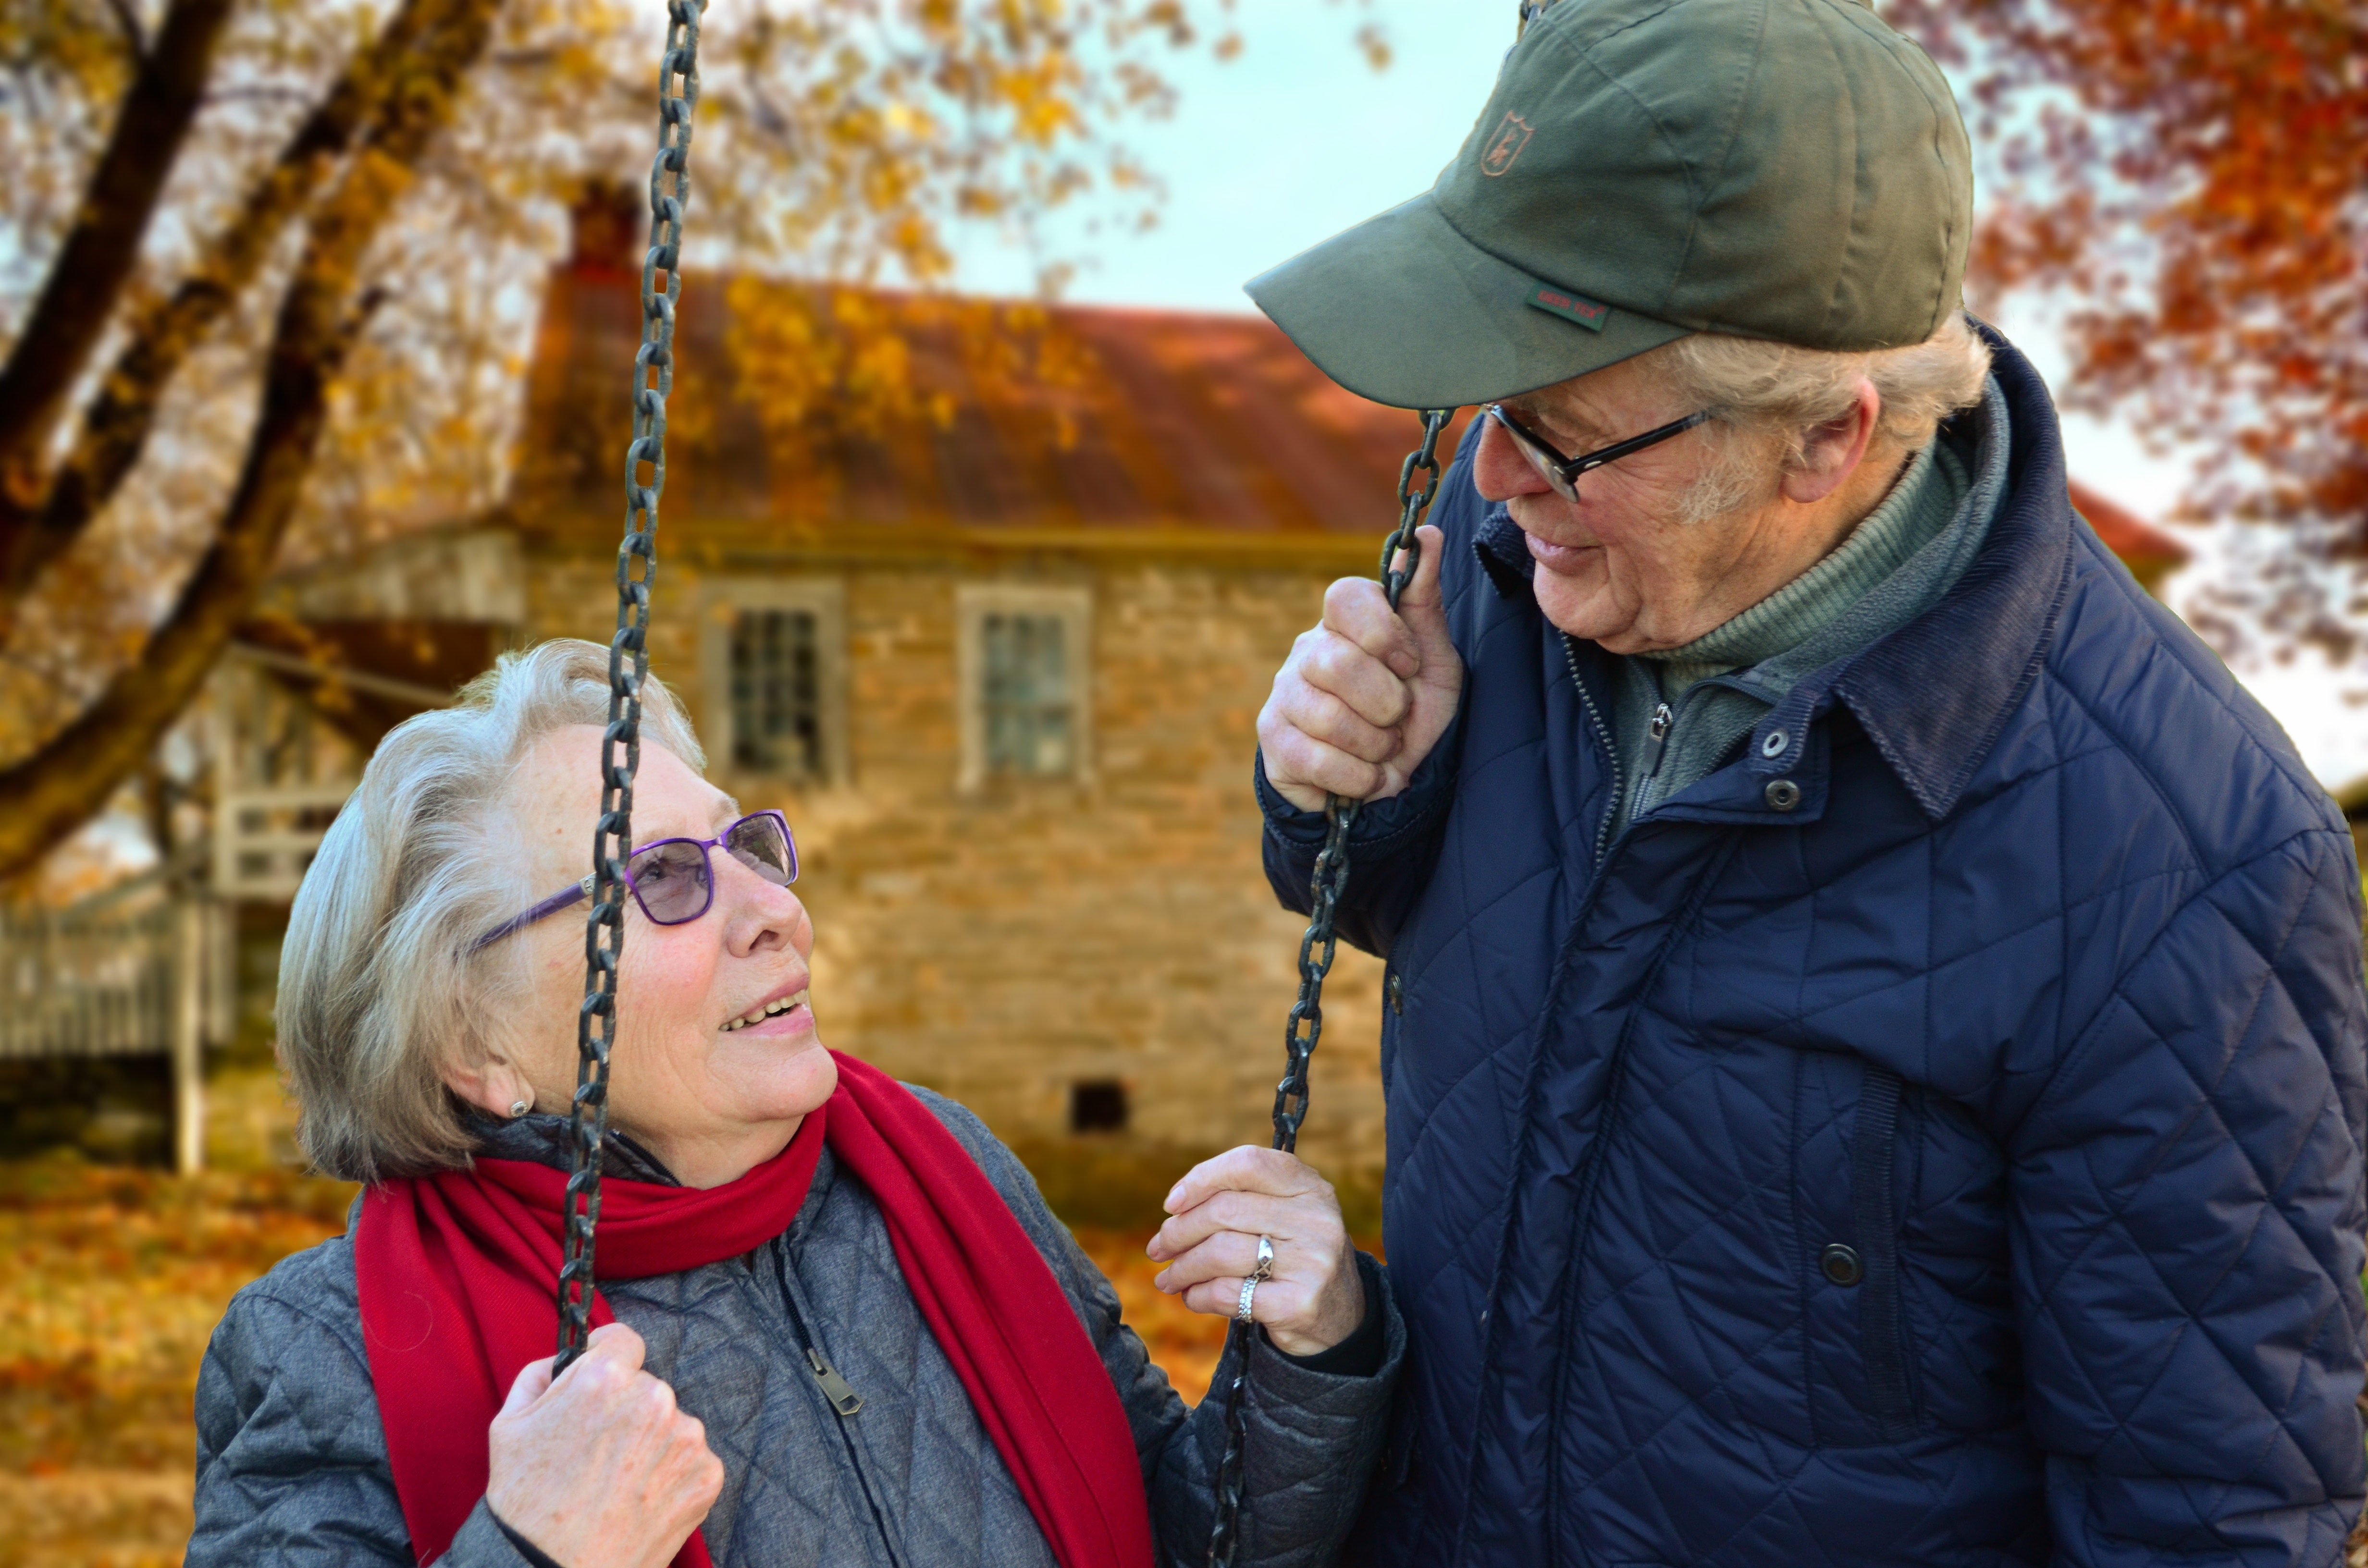 Senior couple talking while woman is seated on a swing, on an autumn day